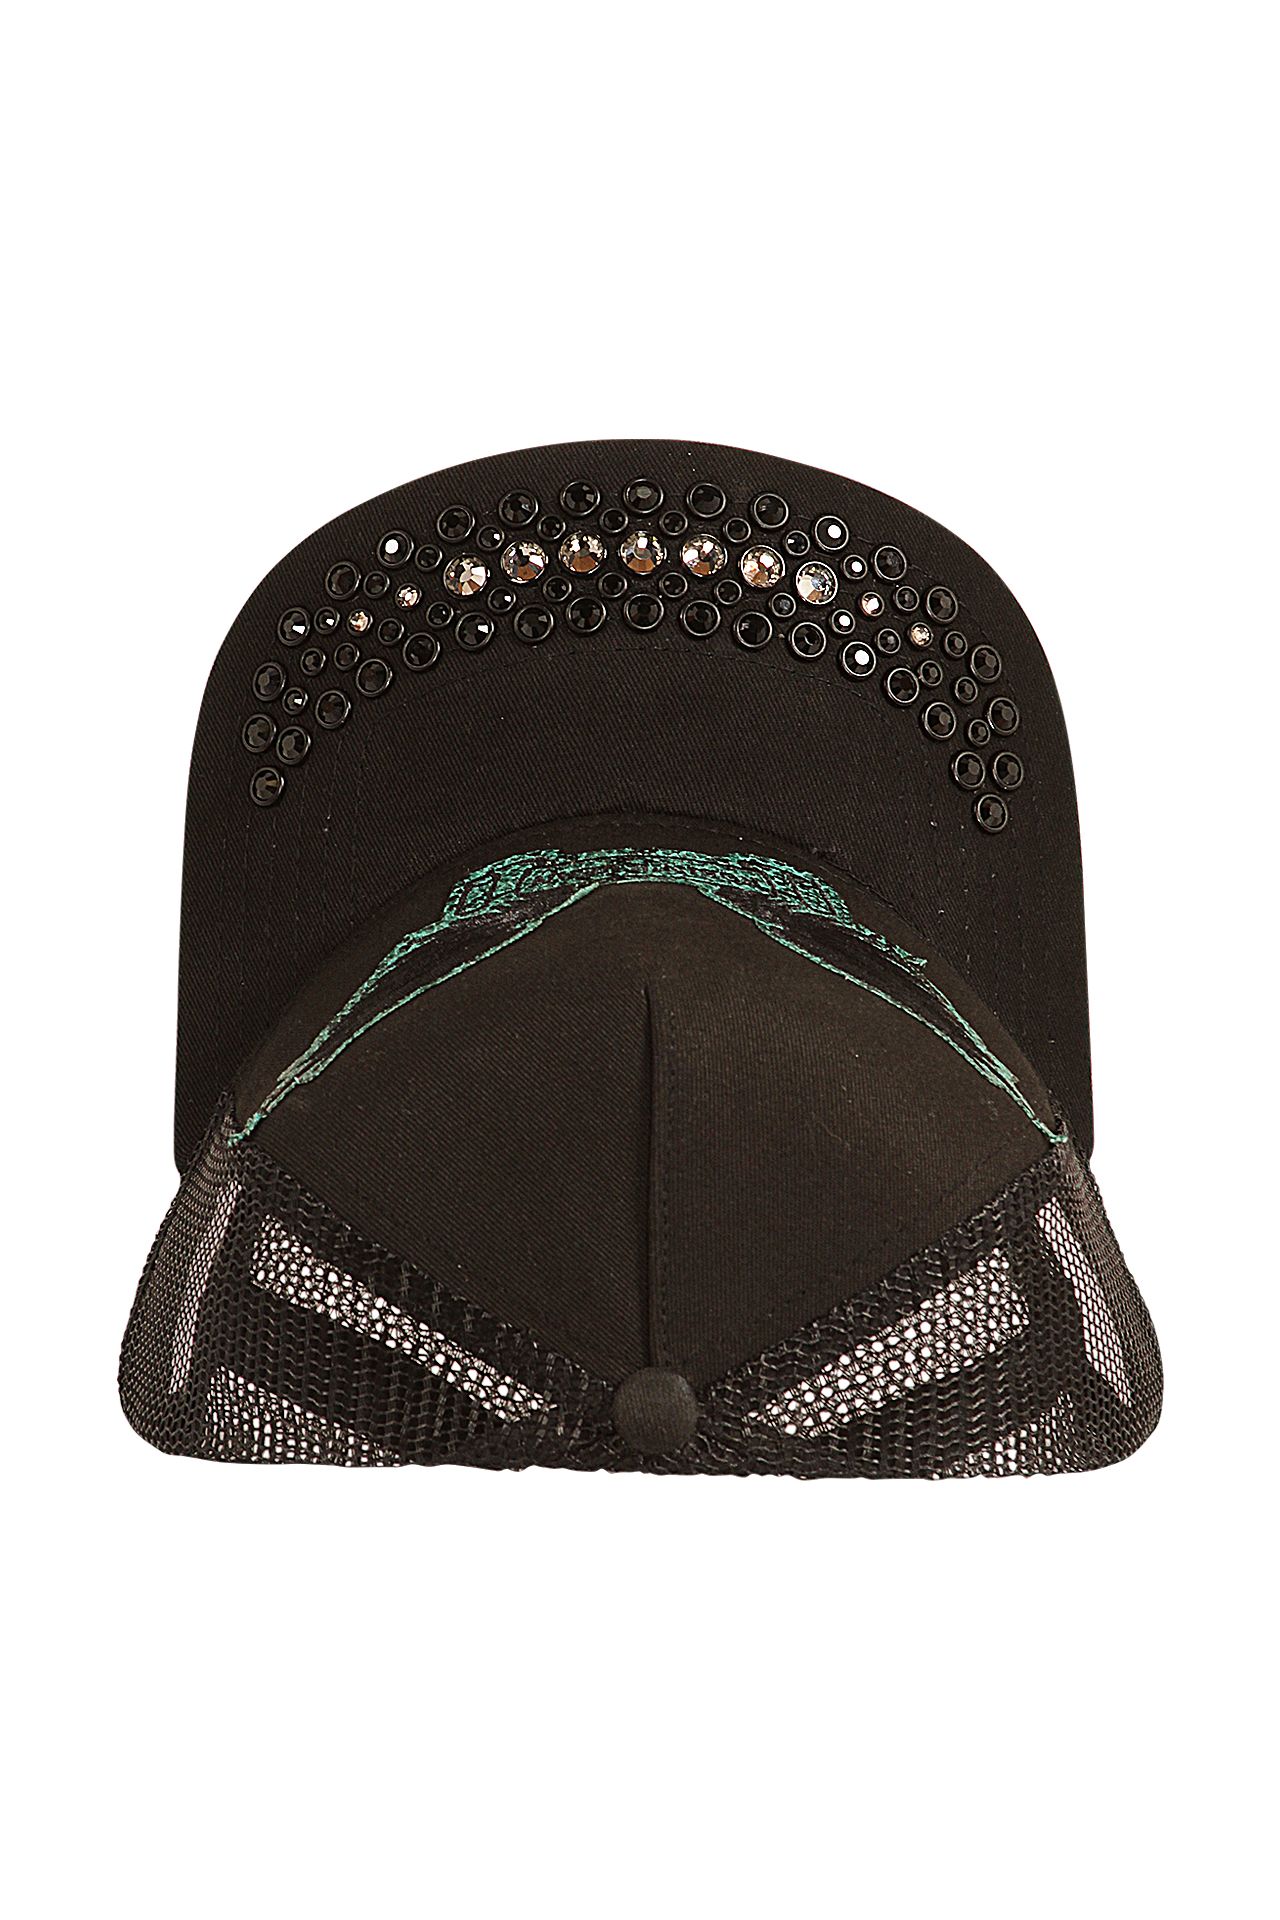 BLACK TRUCKER IN EMERALD VIPER WITH BLACK & CLEAR CRYSTALS